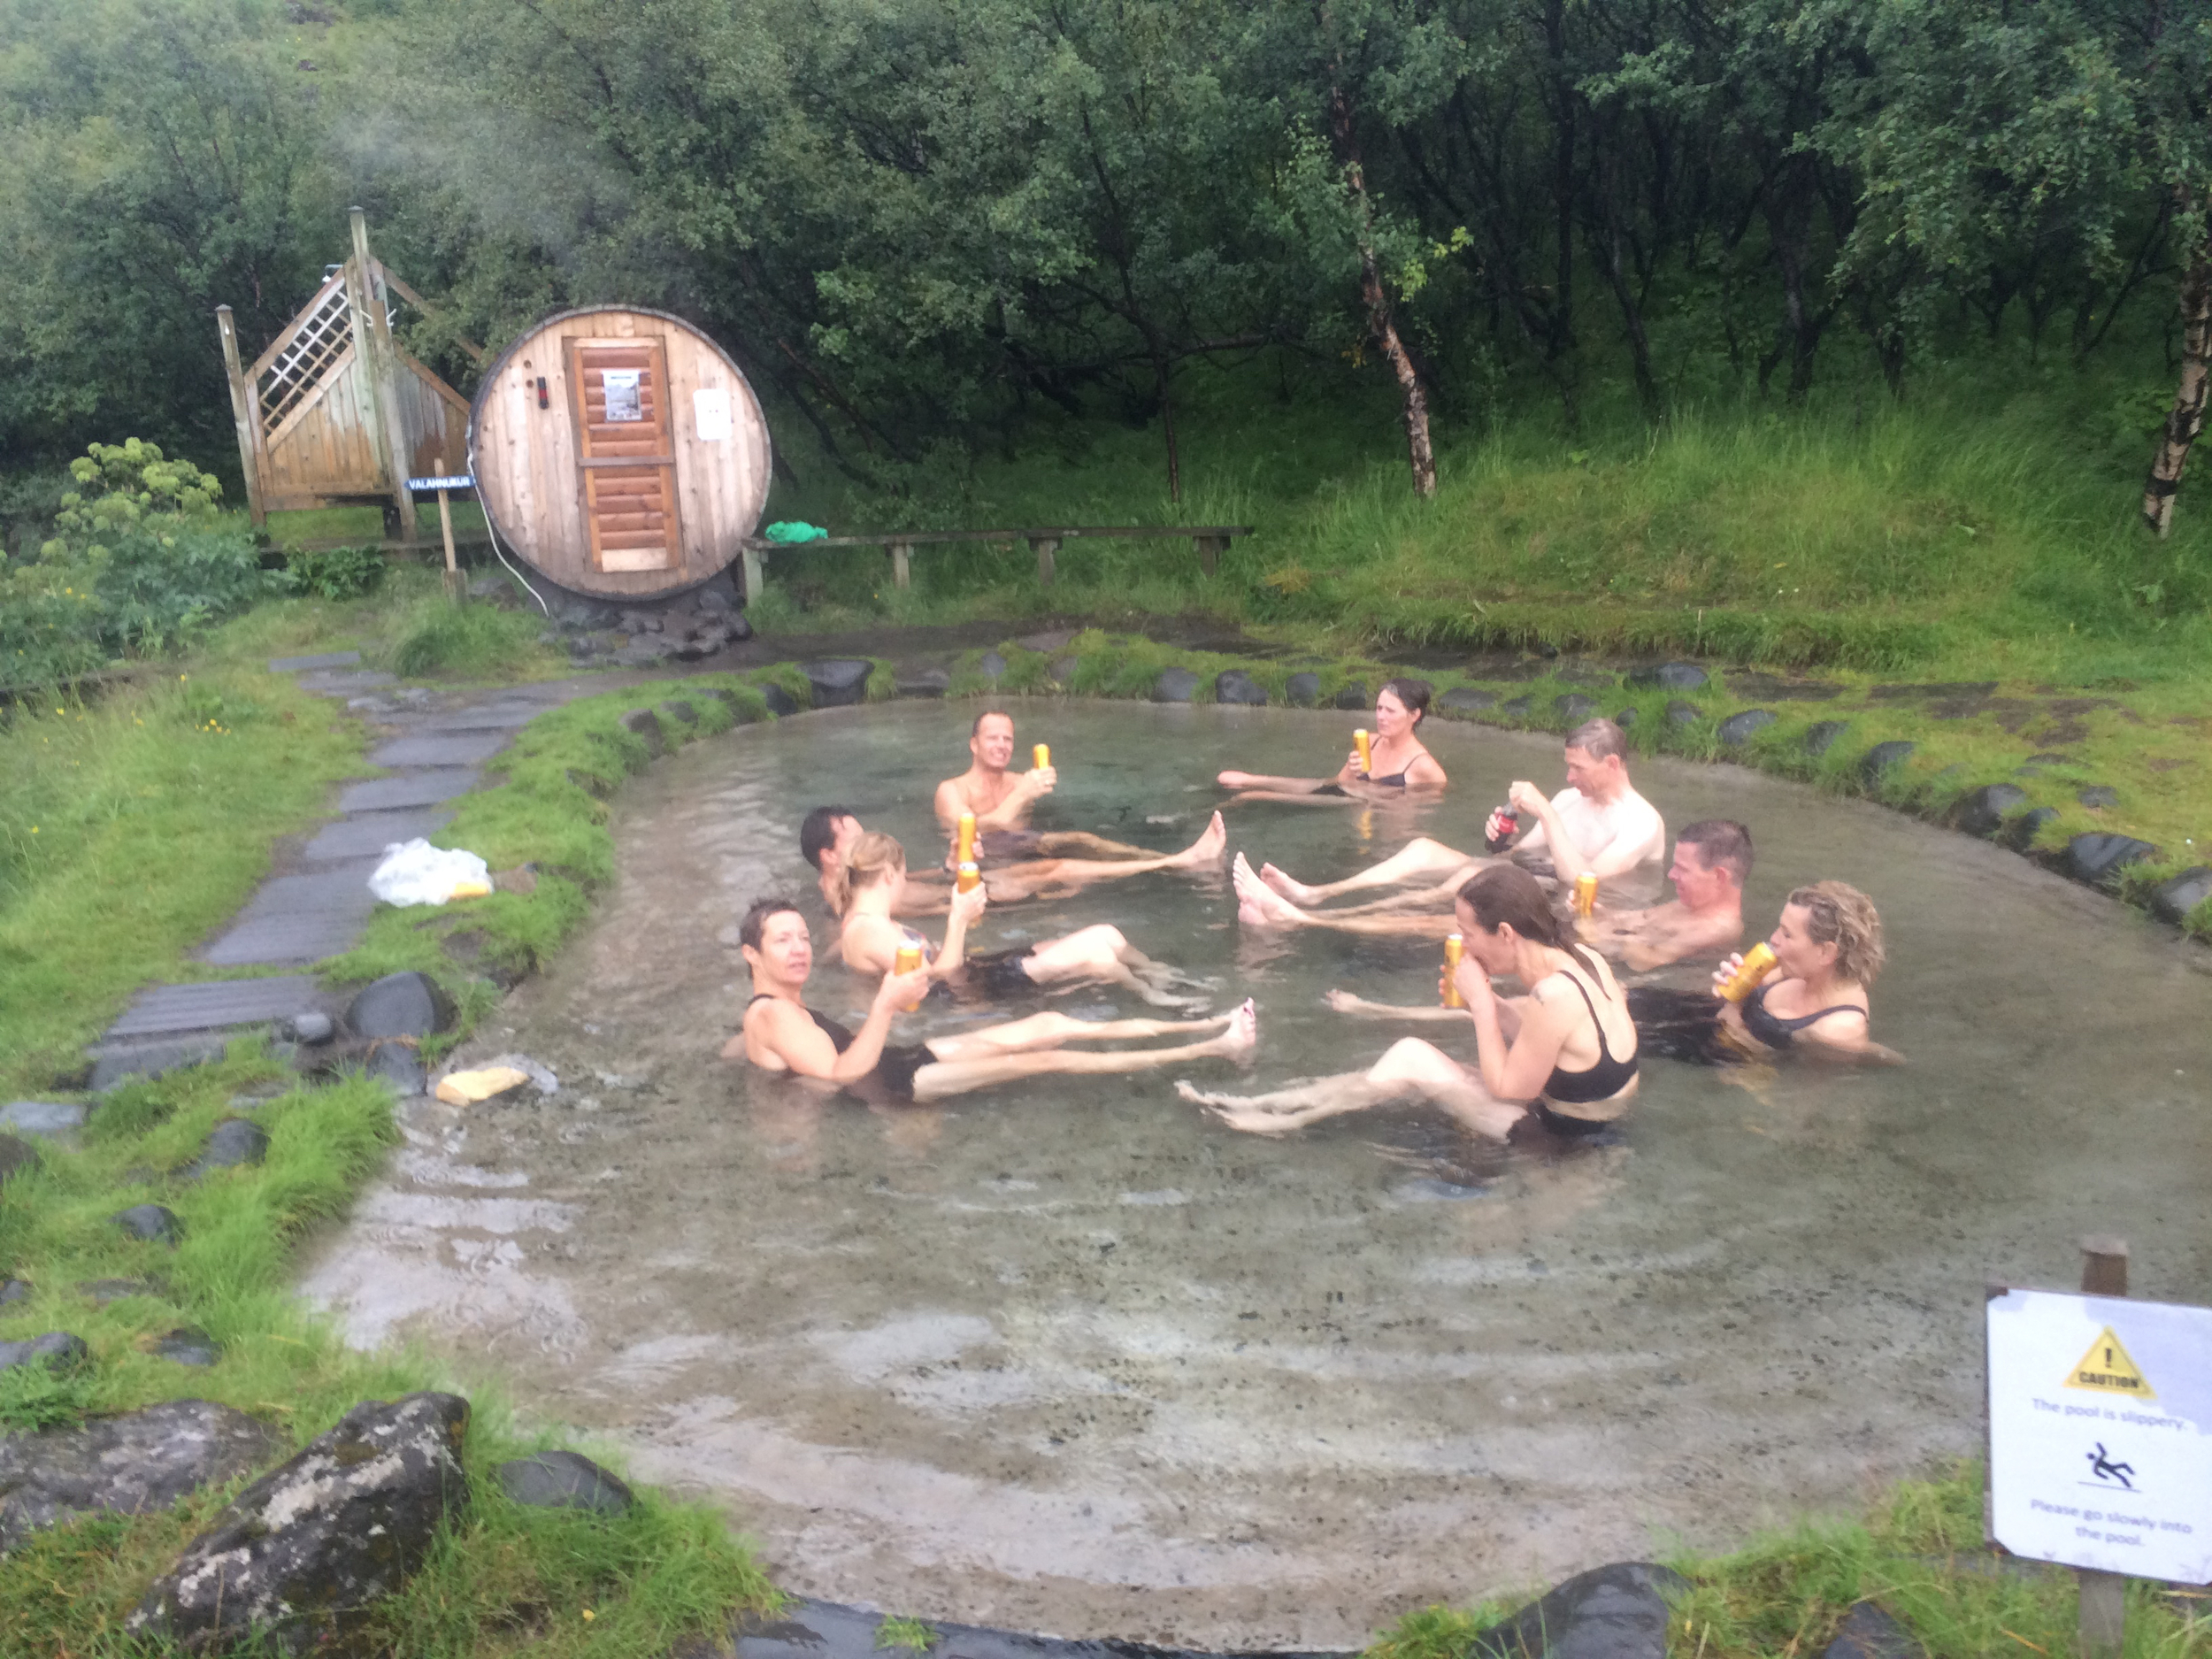 Runners relaxing in a Hot tub